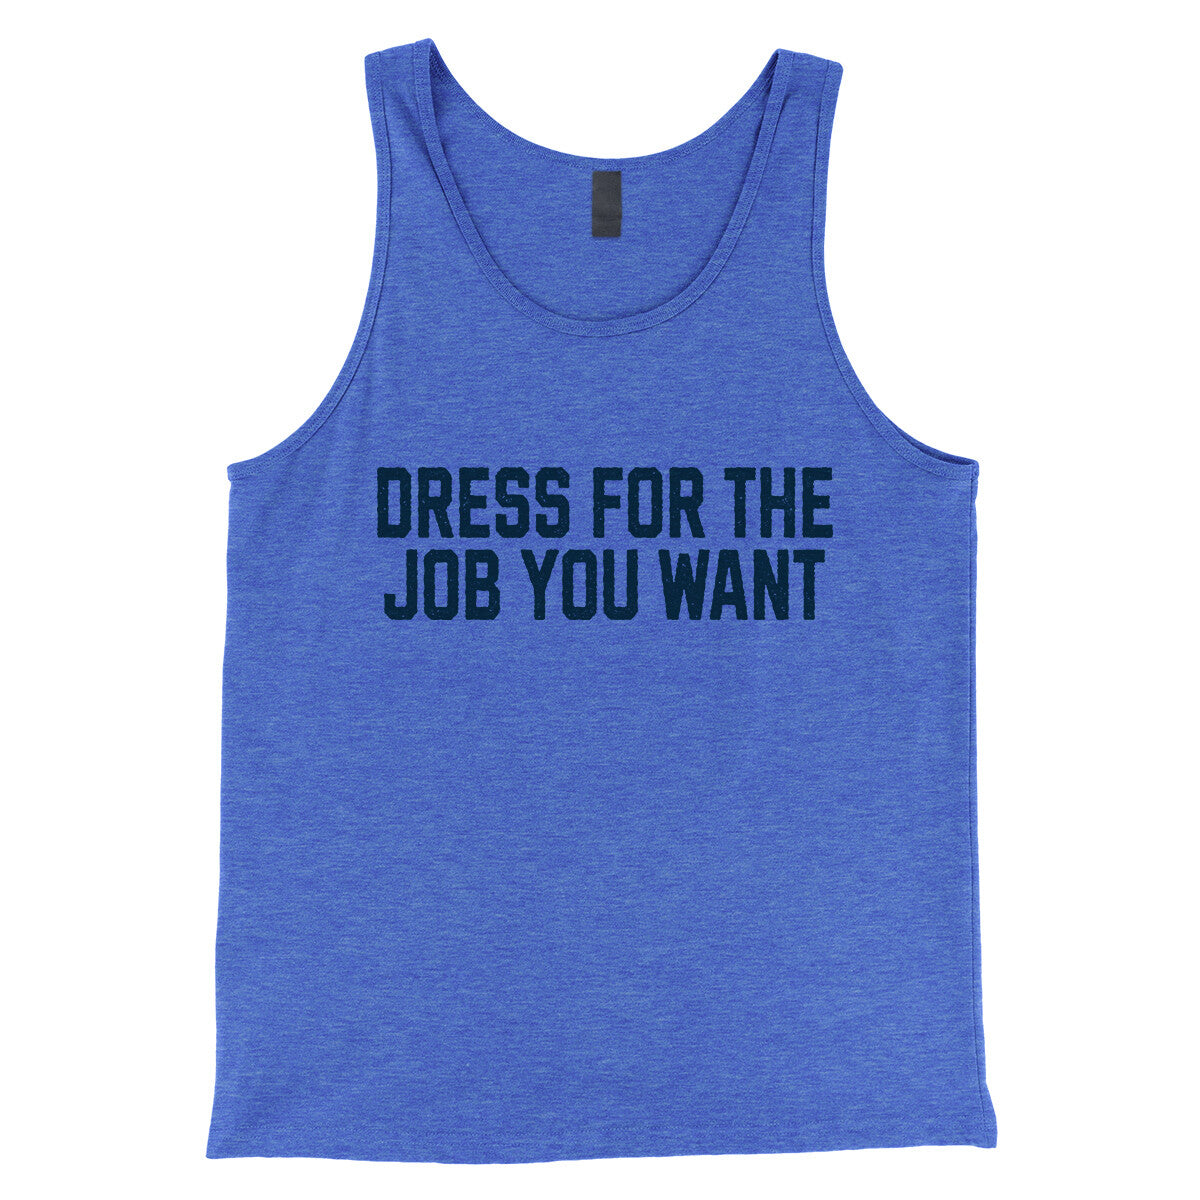 Dress for the Job you Want in True Royal TriBlend Color